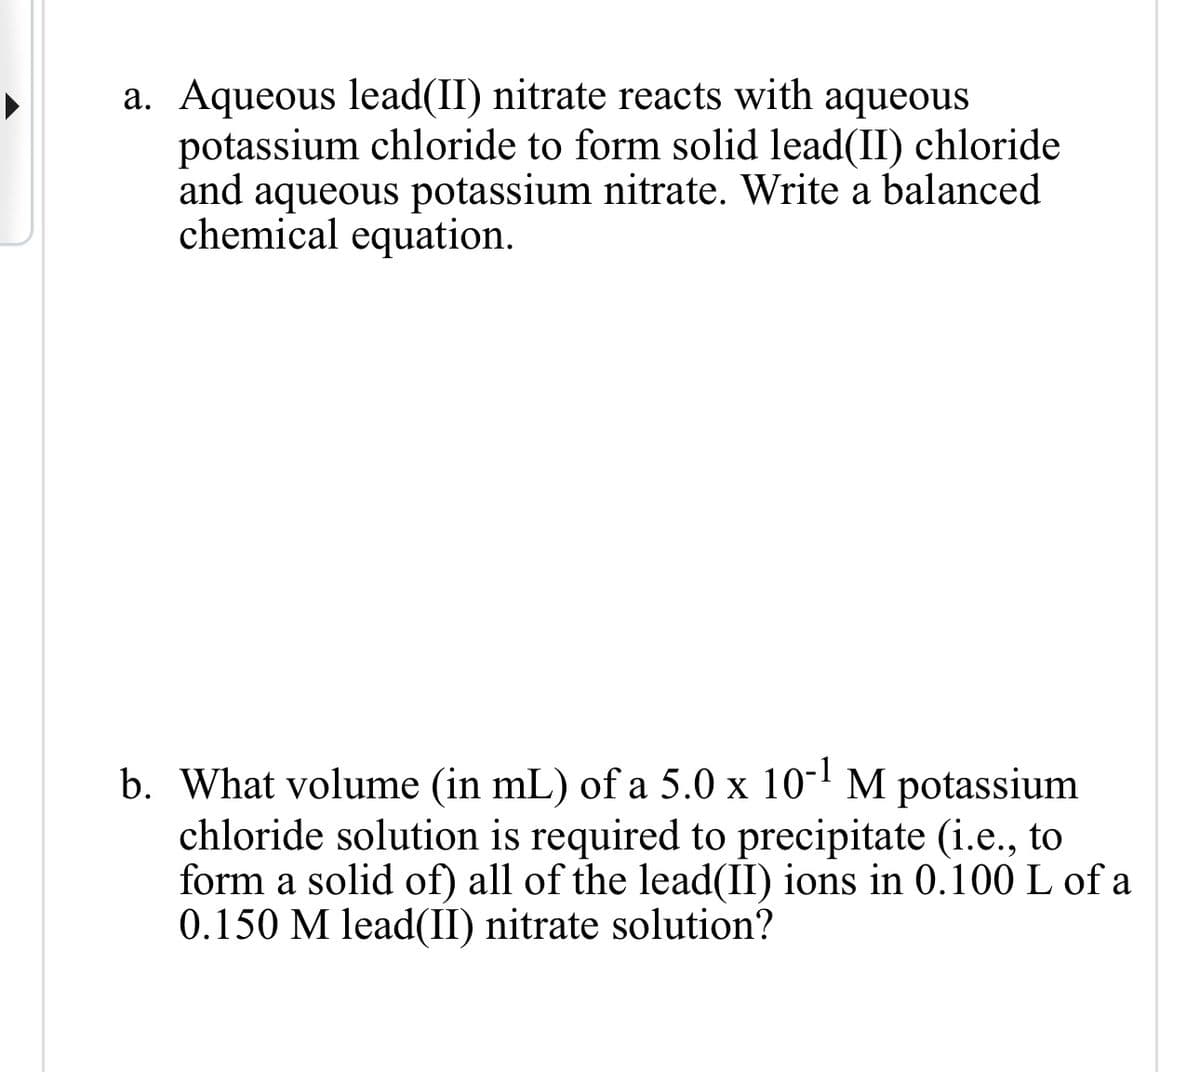 a. Aqueous lead(II) nitrate reacts with aqueous
potassium chloride to form solid lead(II) chloride
and aqueous potassium nitrate. Write a balanced
chemical equation.
b. What volume (in mL) of a 5.0 x 10-1 M potassium
chloride solution is required to precipitate (i.e., to
form a solid of) all of the lead(II) ions in 0.100 L of a
0.150 M lead(II) nitrate solution?